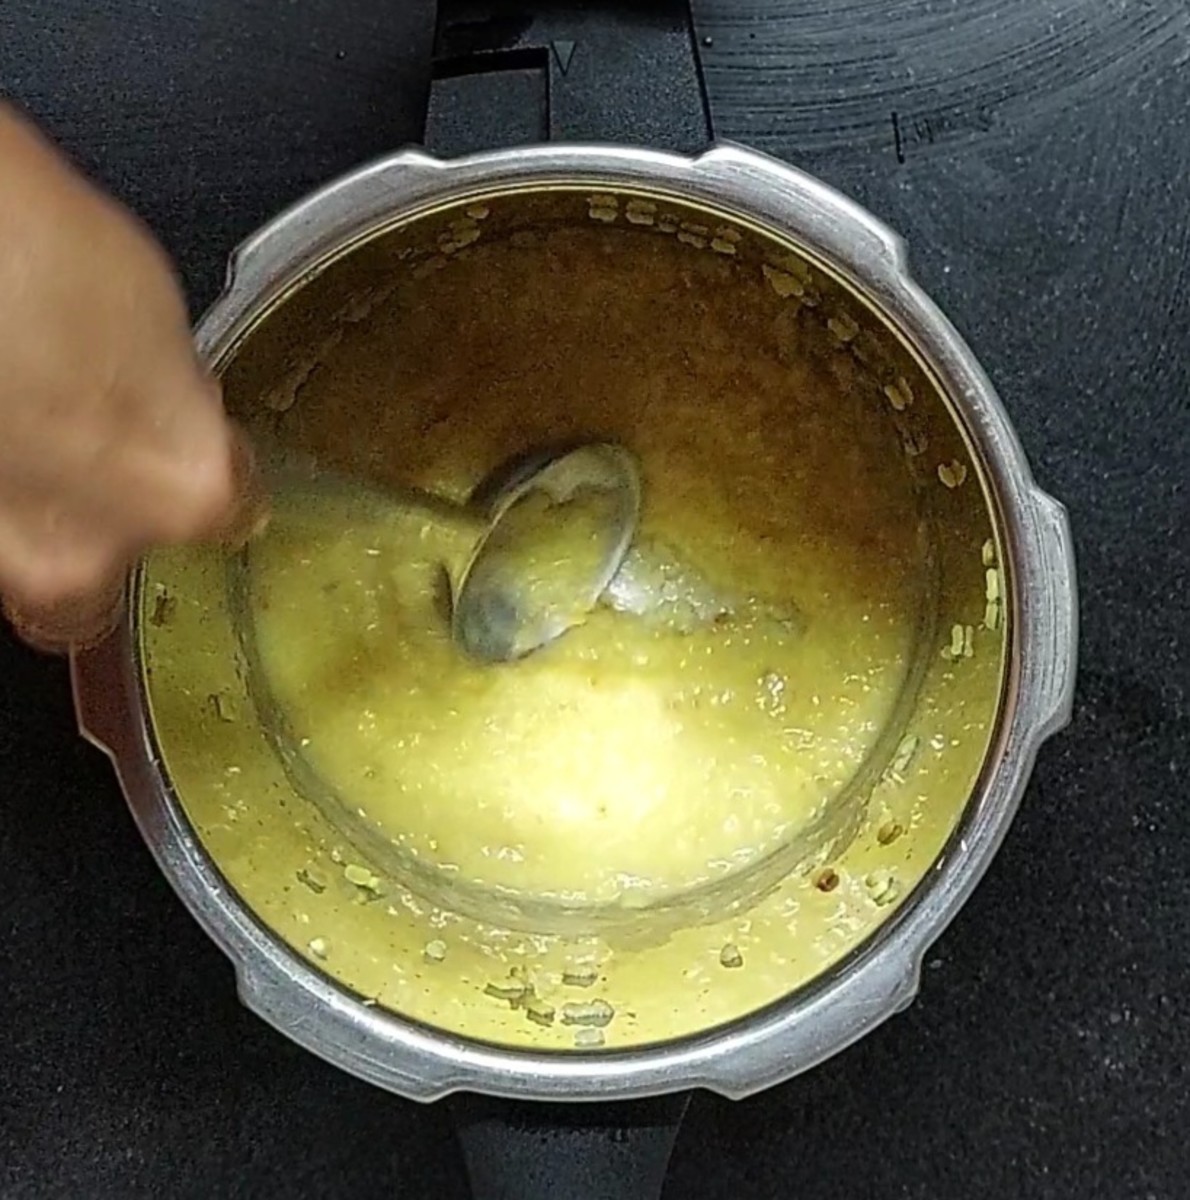 When the pressure of the cooker subsides on its own, open the lid, slightly mash the dal and set aside.